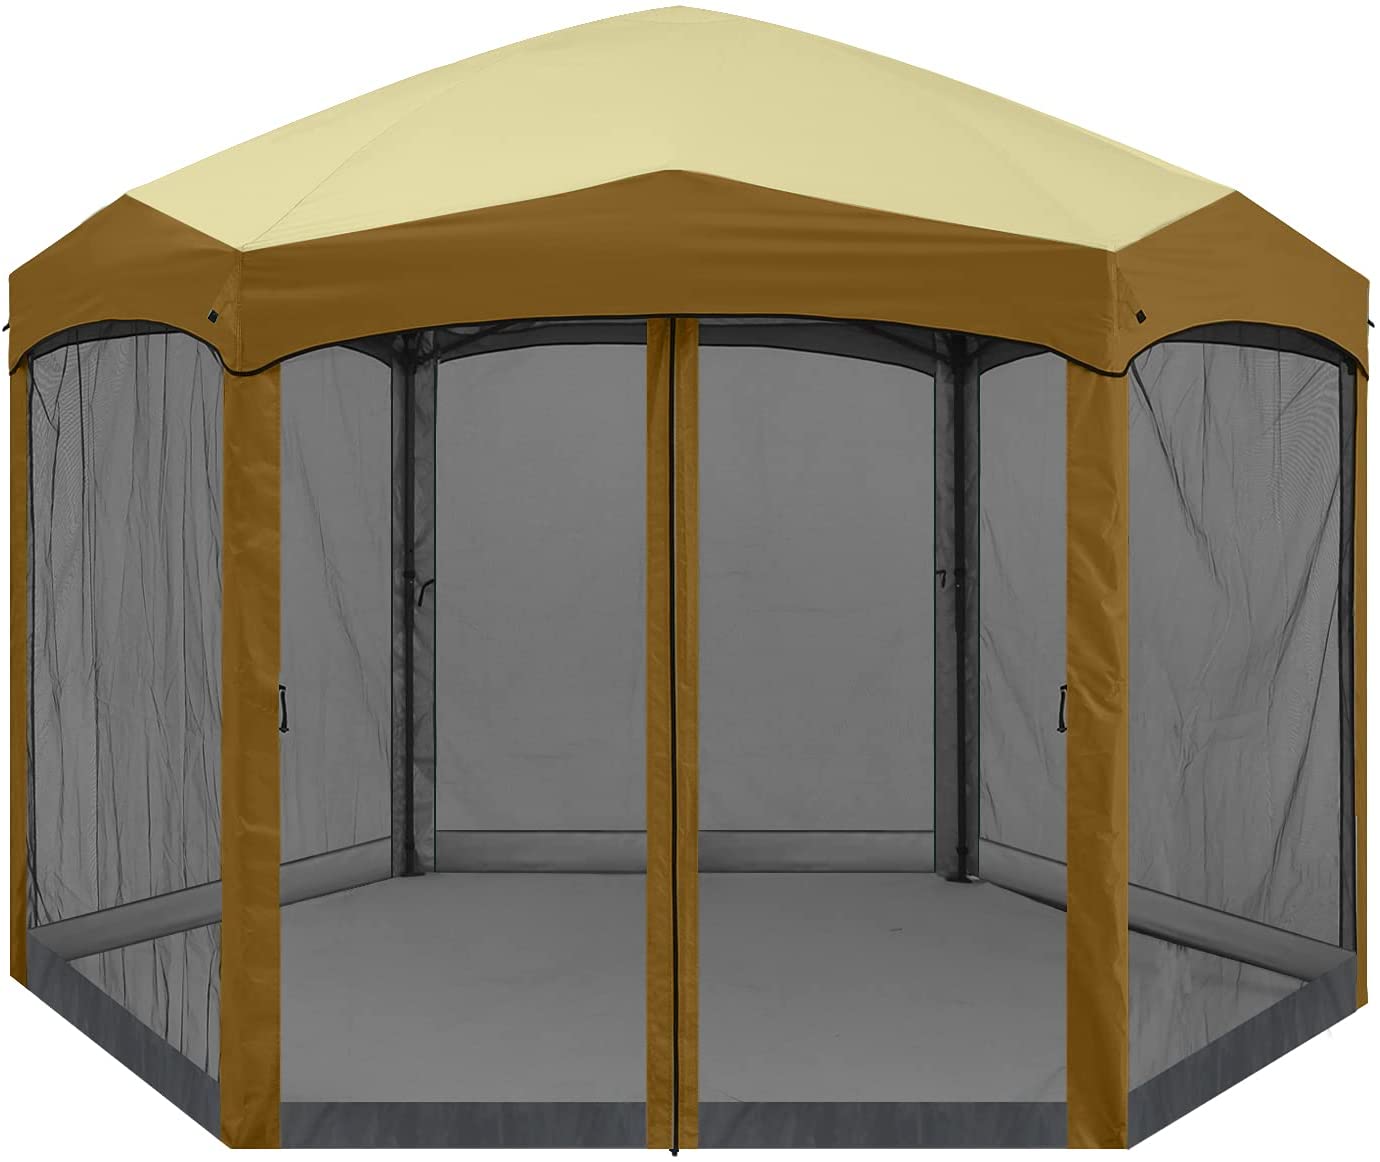 Pop Up Camping Gazebo 6 Sided Instant Screened Canopy Tent Outdoor Screen House Room - ABC-CANOPY